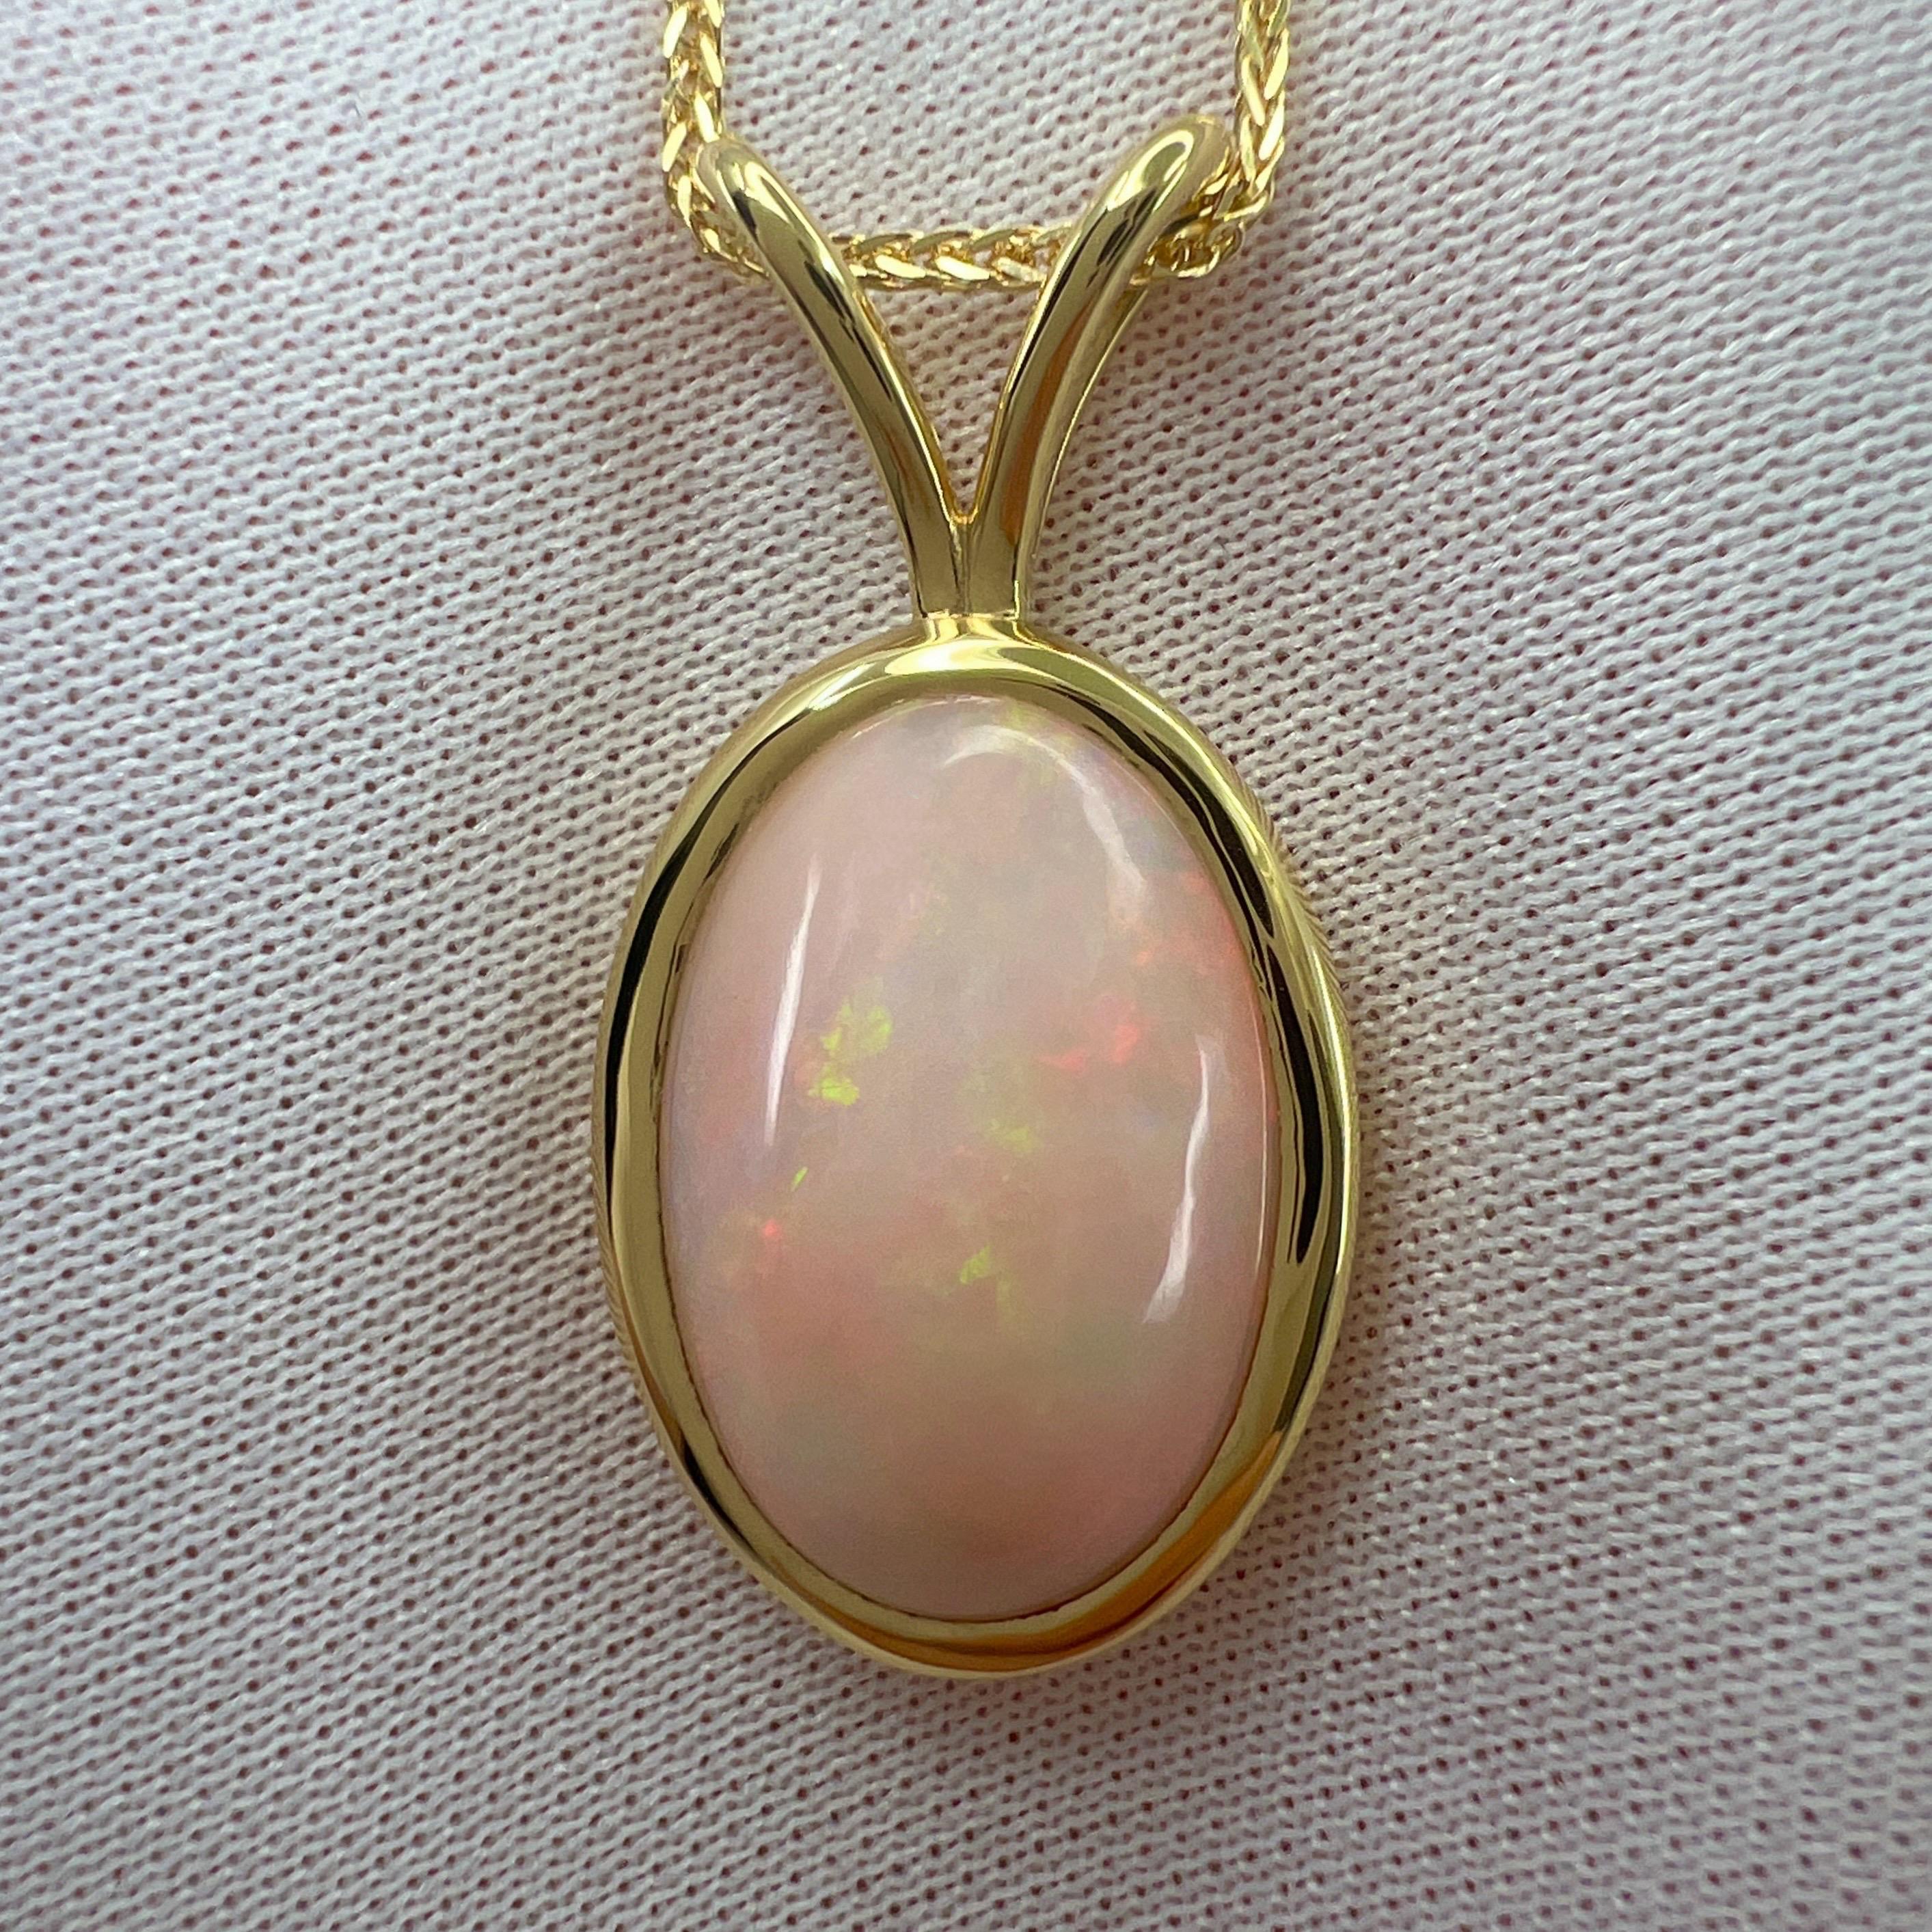 6.15ct Fine White Opal Oval Cabochon 18k Yellow Gold Bezel Pendant Necklace For Sale 2